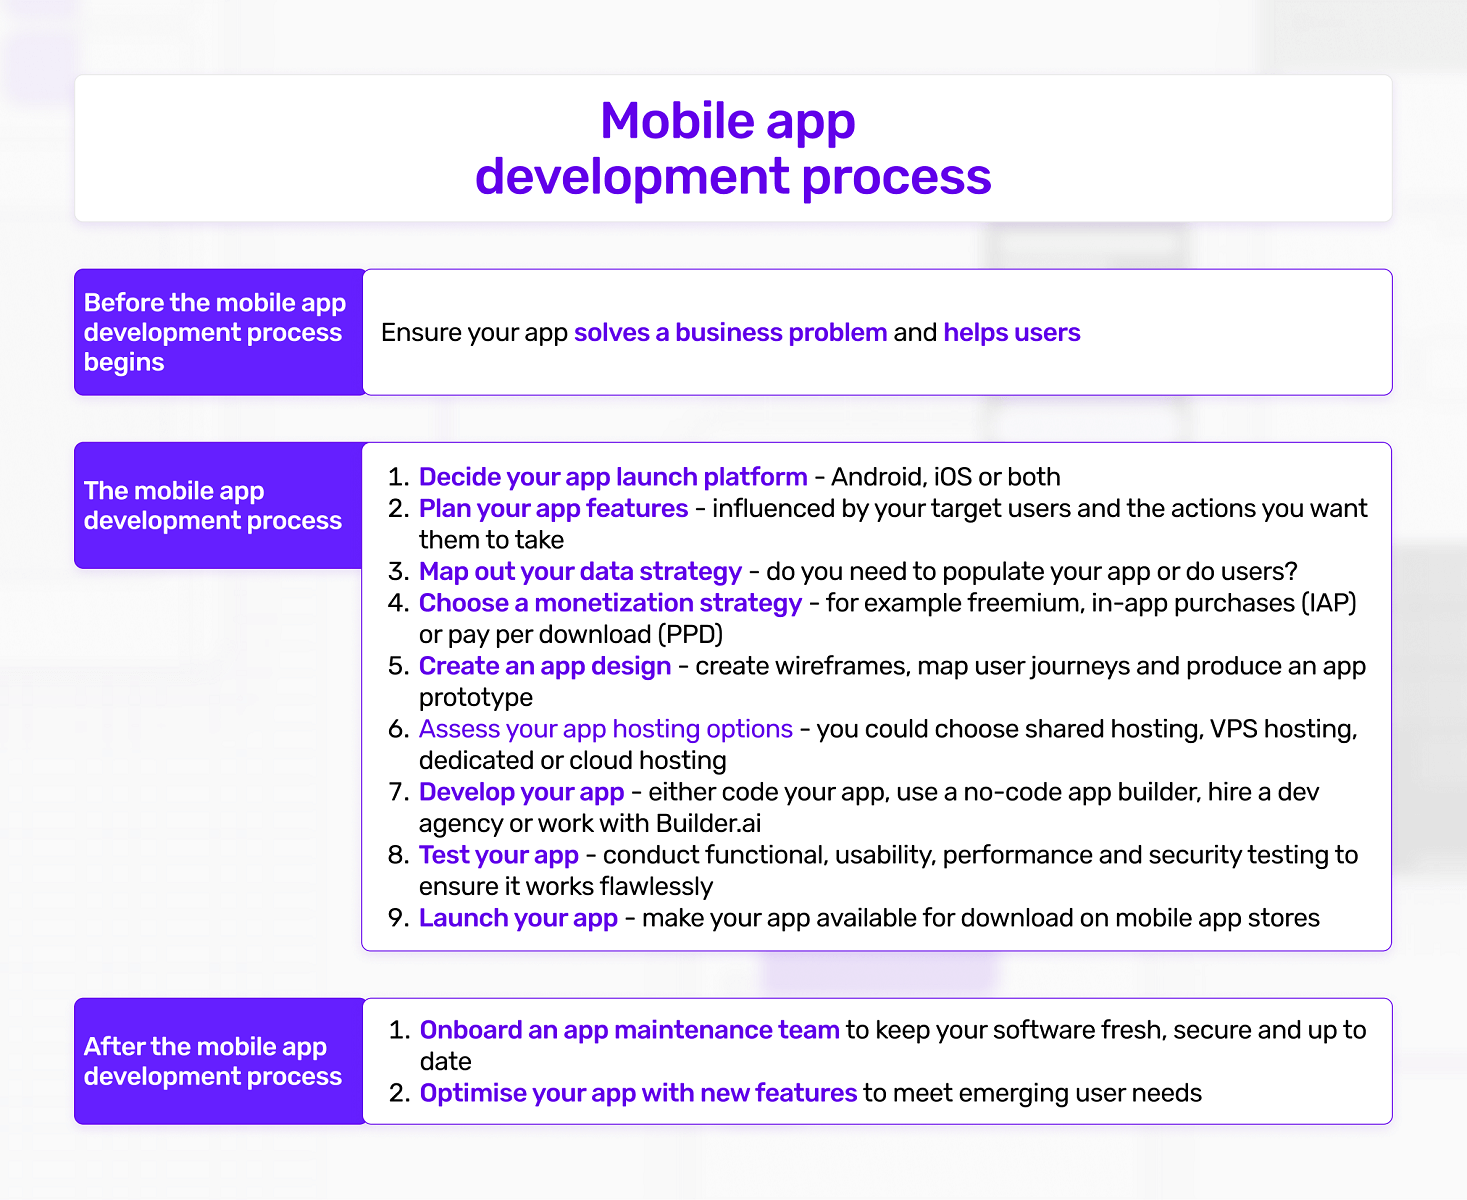 Mobile app development process: An infographic by Builder.ai